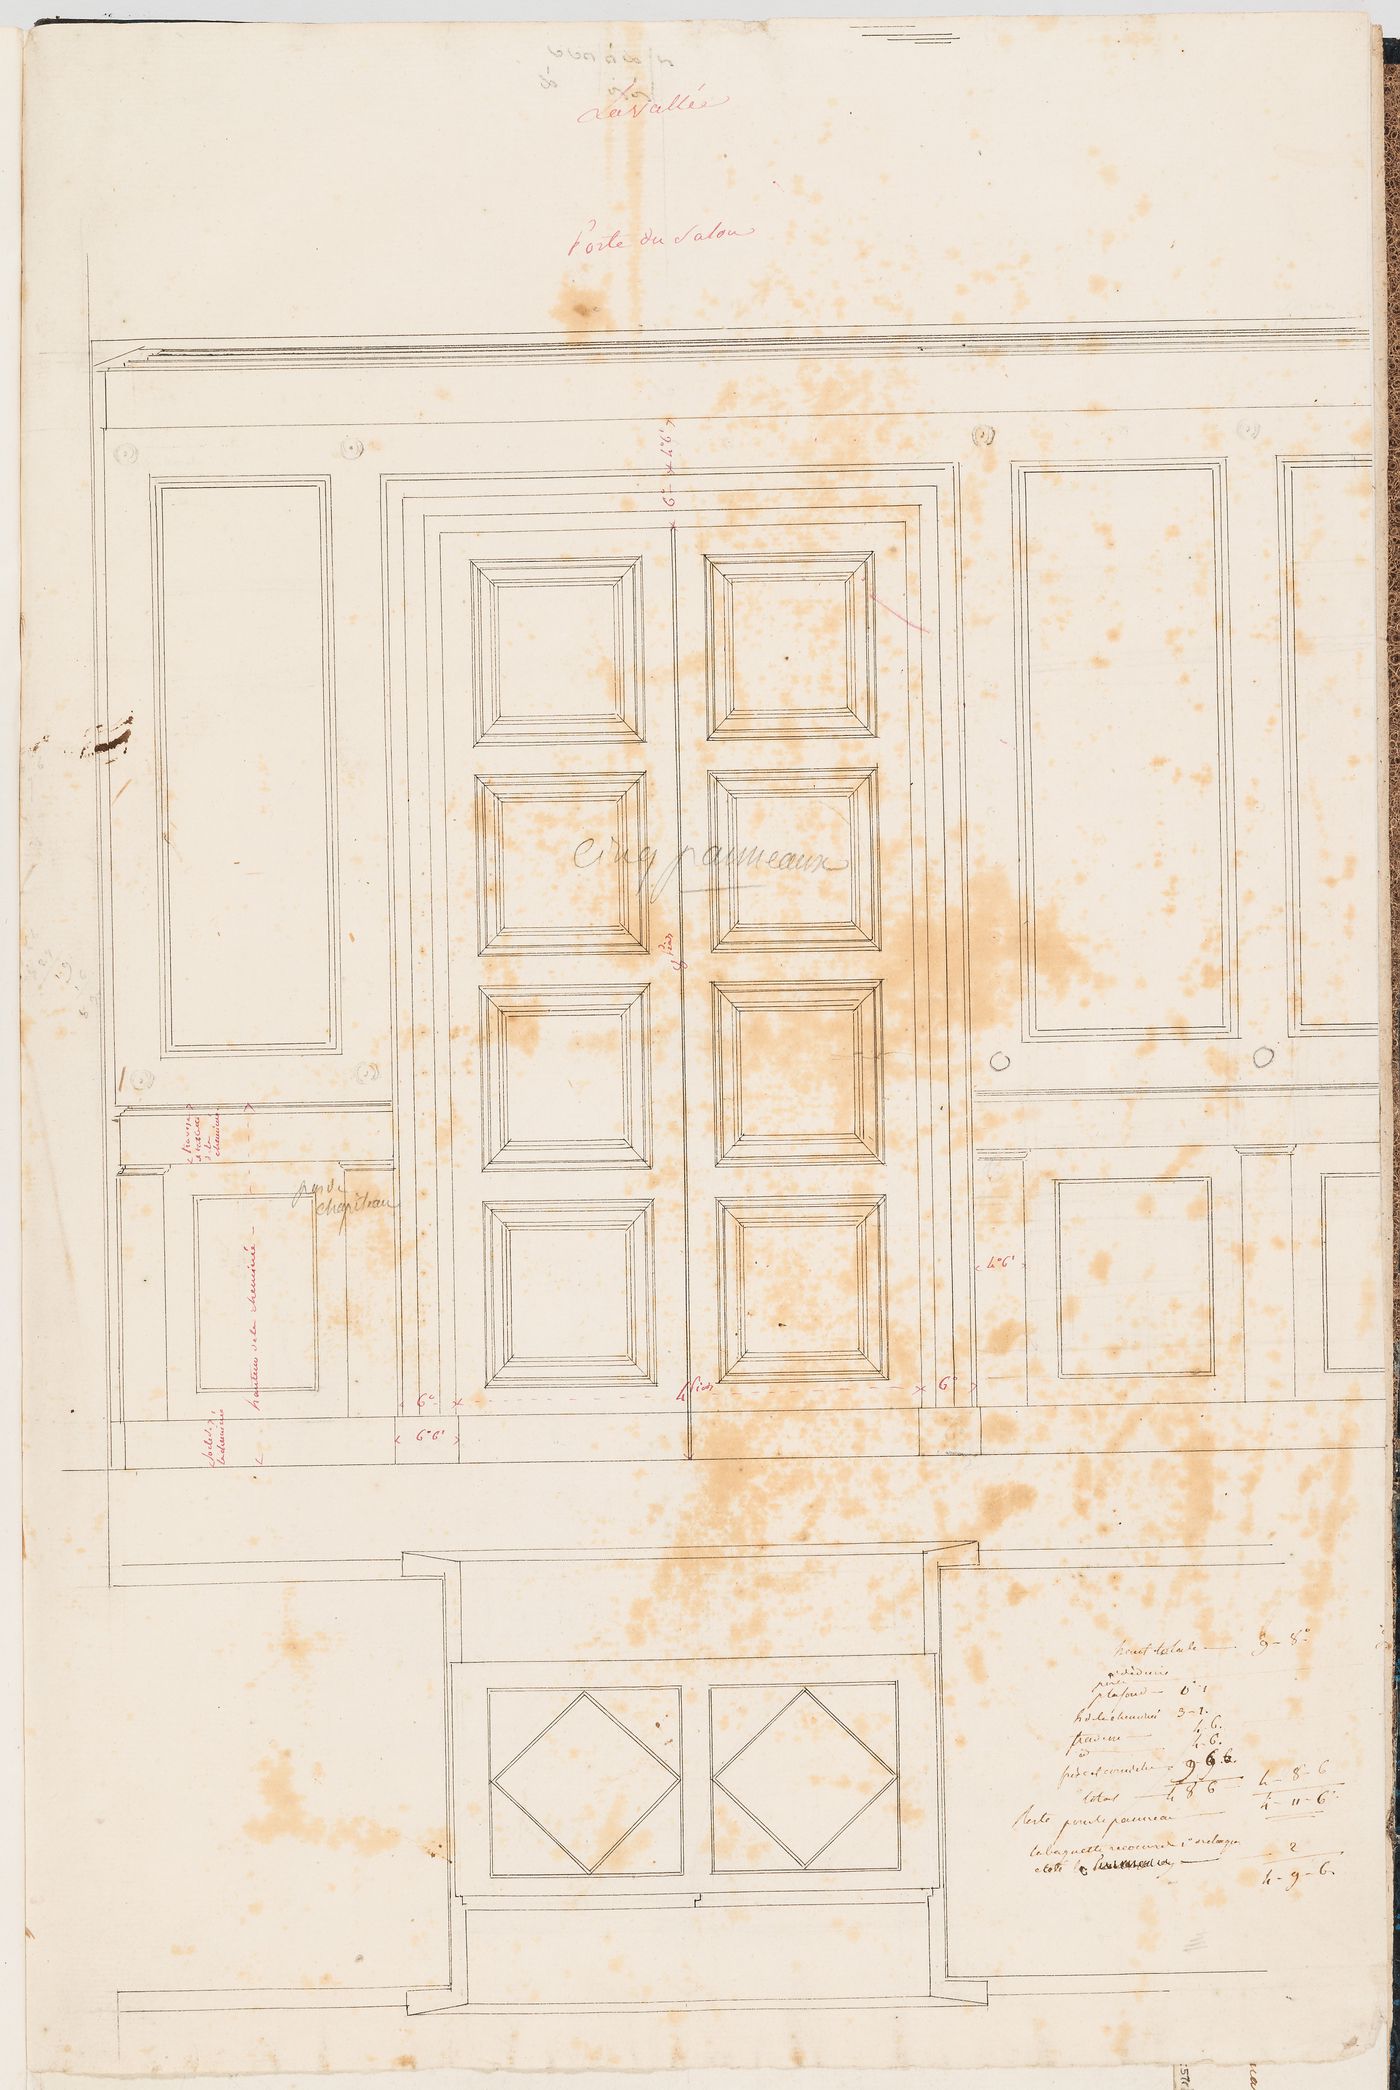 Elevation and plan for the salon doorway for the house, Domaine de La Vallée; verso: Elevation for an unidentified building